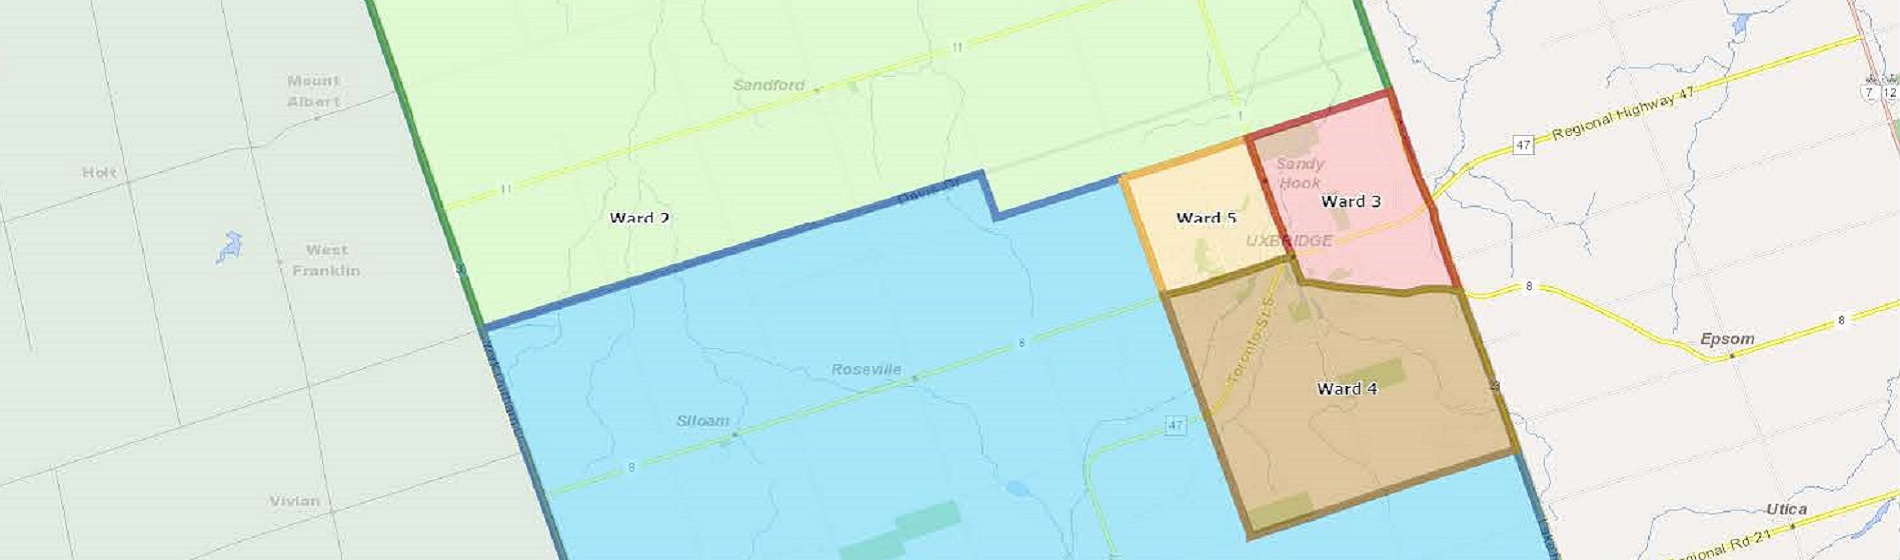 map of wards of the township of uxbridge